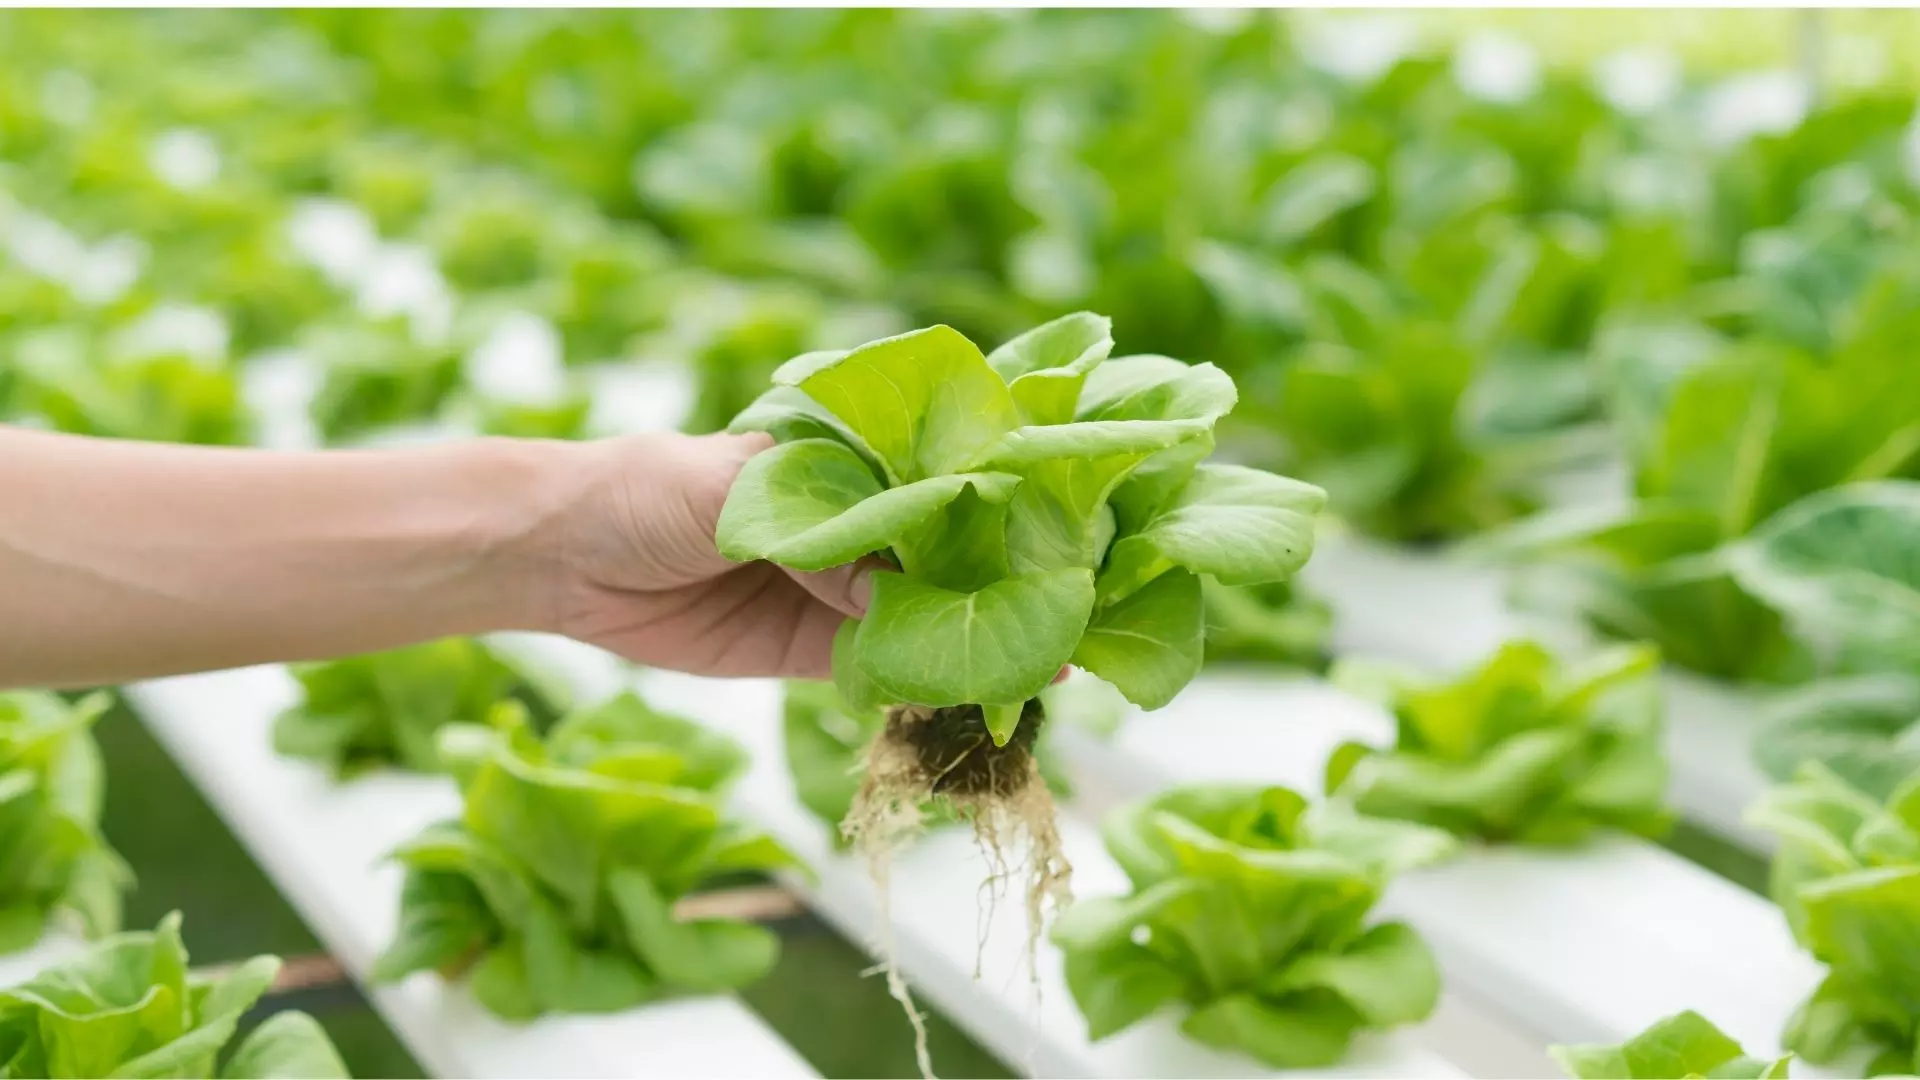 Hydroponic Farming: Revolutionizing Agriculture Through Soilless Cultivation